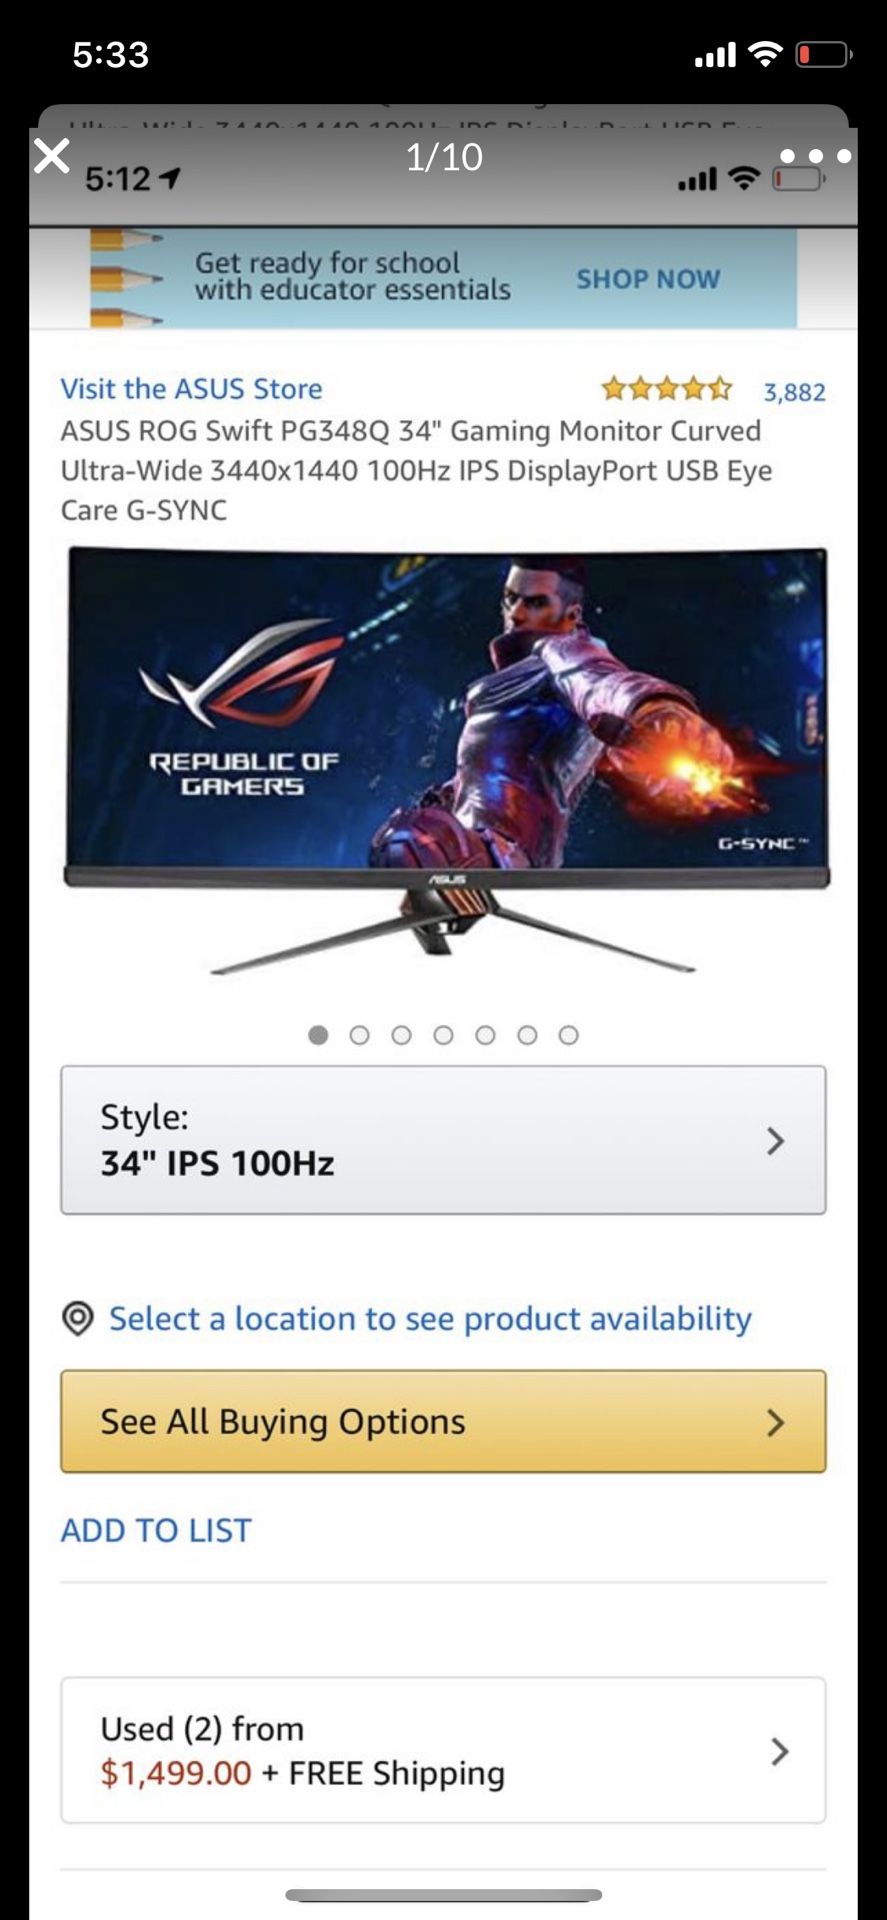 ASUS ROG Swift PG348Q 34" Gaming Monitor Curved Ultra-Wide 3440x1440 100Hz IPS DisplayPort USB Eye Care G-SYNC